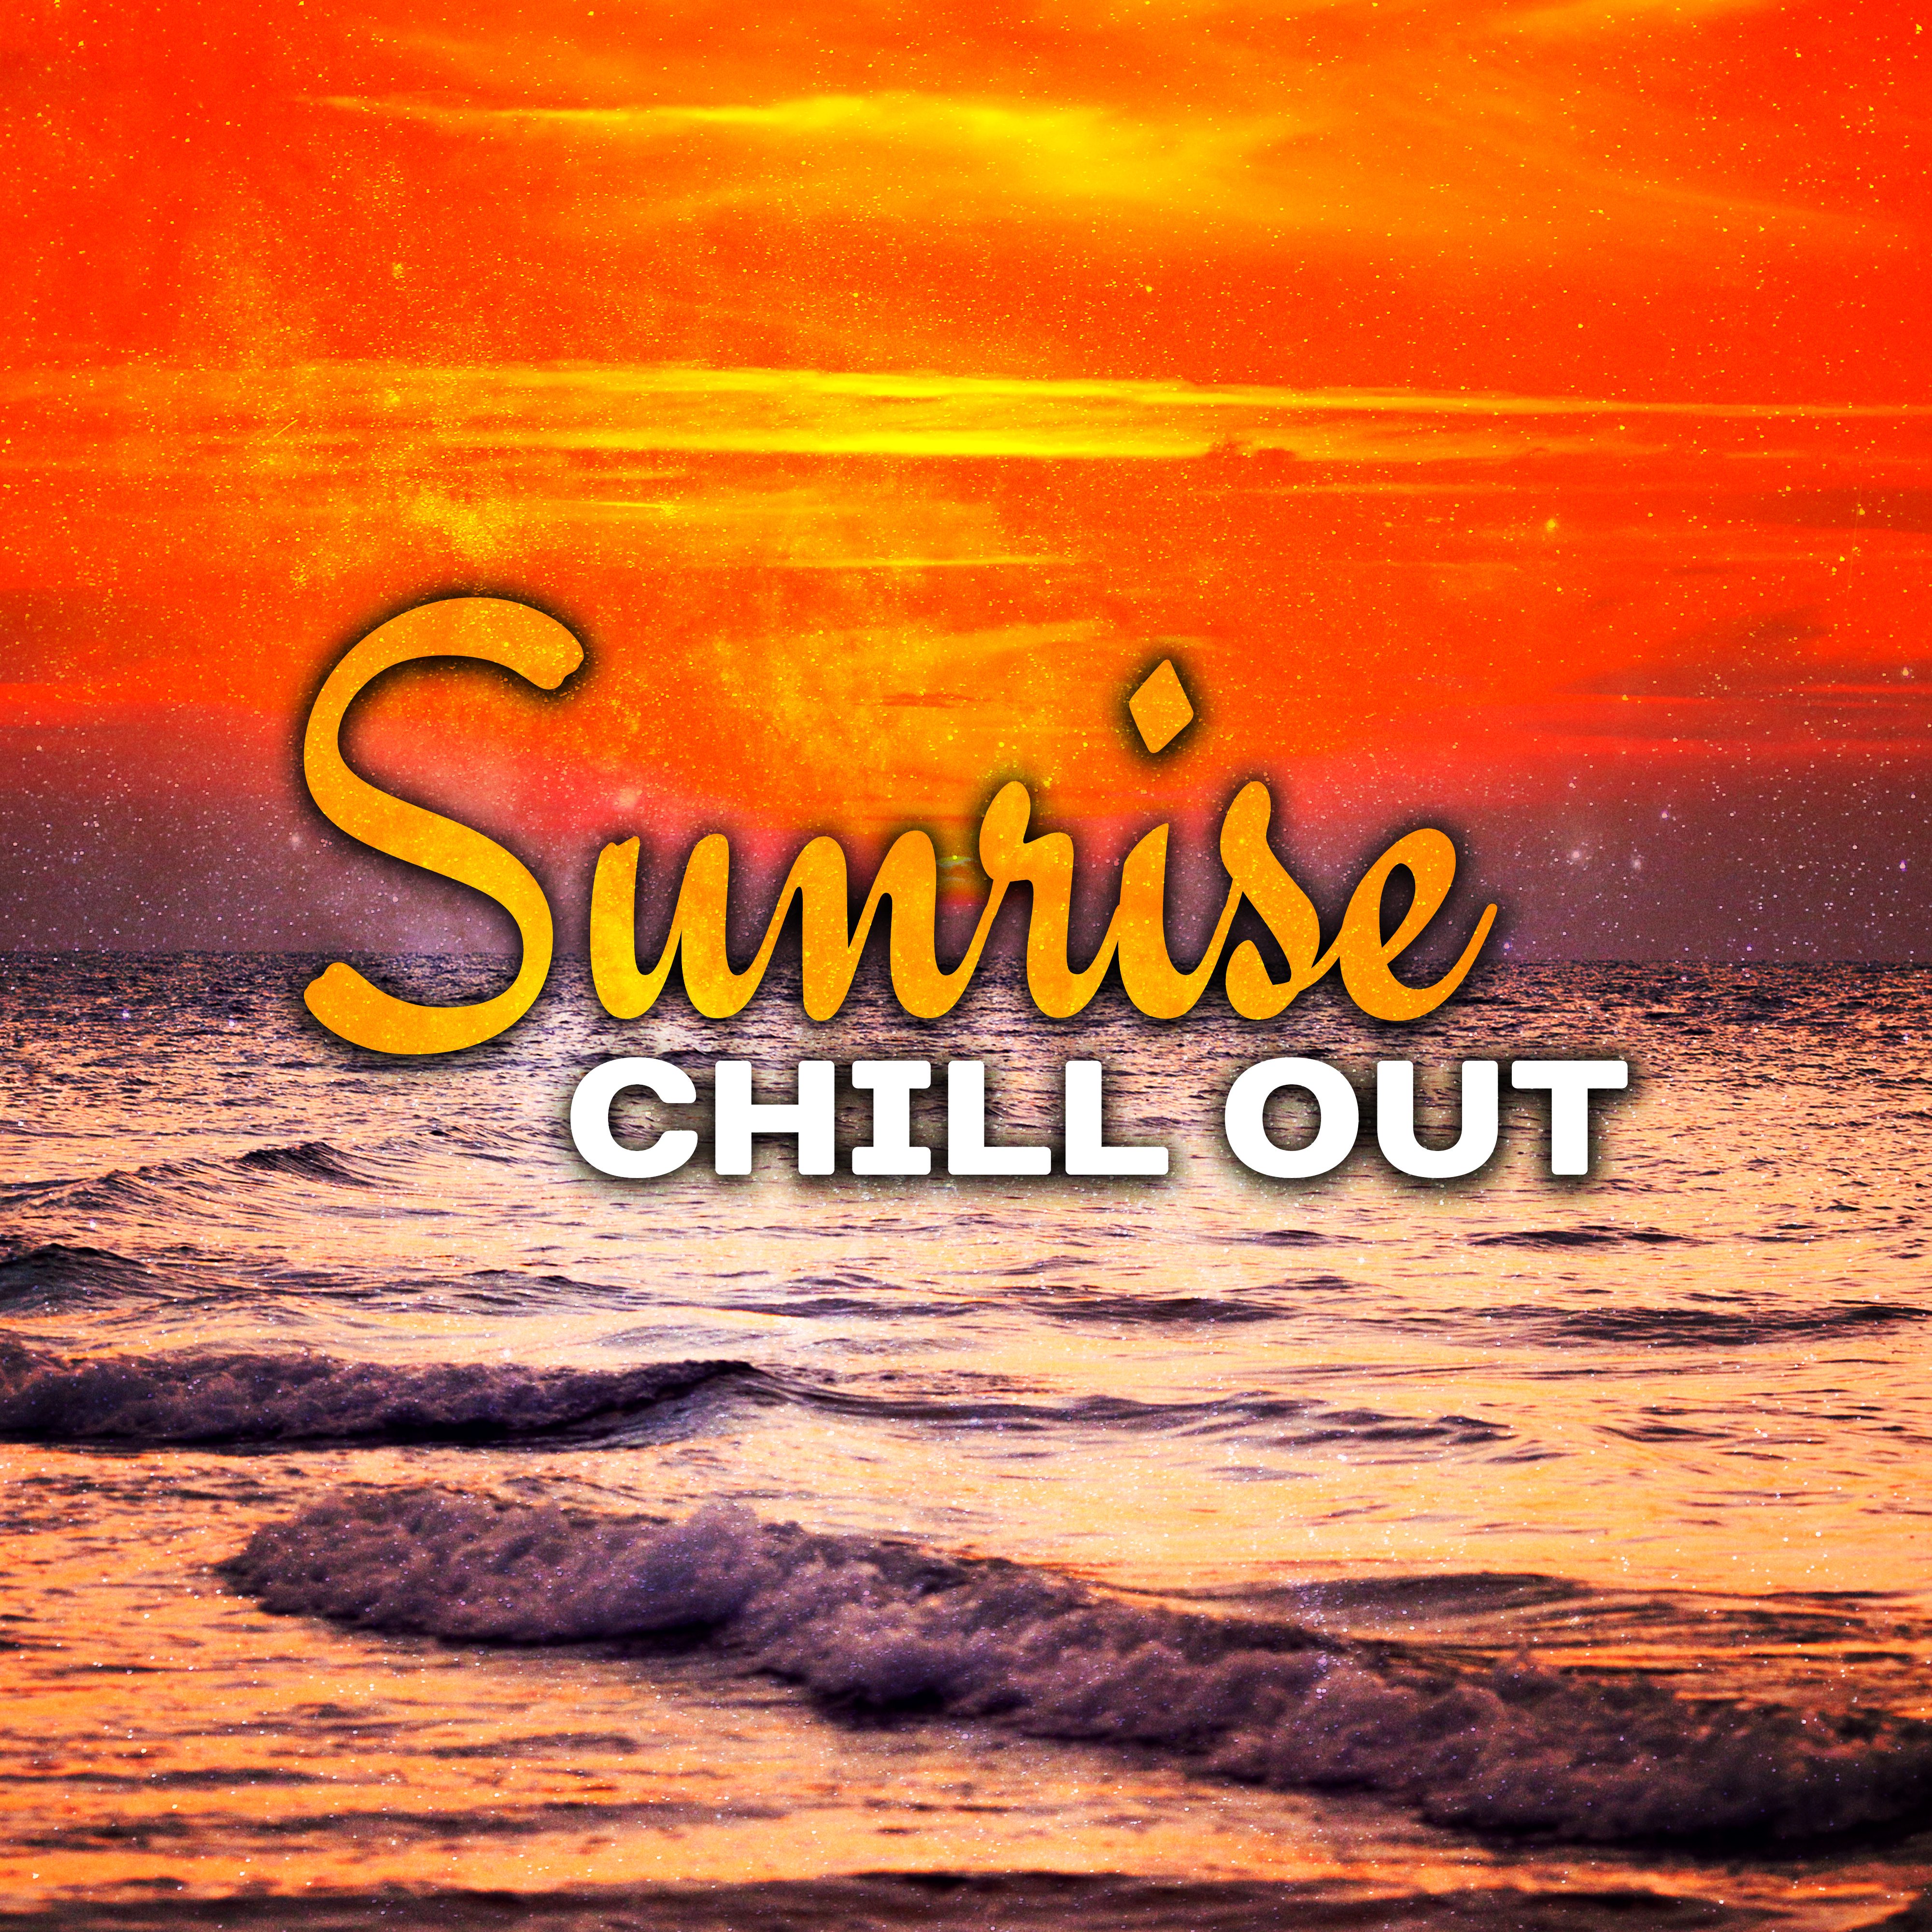 Sunrise Chill Out – Beach Chill, Pure Relaxation, Stress Relief, Summertime, Ambient Music, Sunrise Feeling, Rest on the Beach